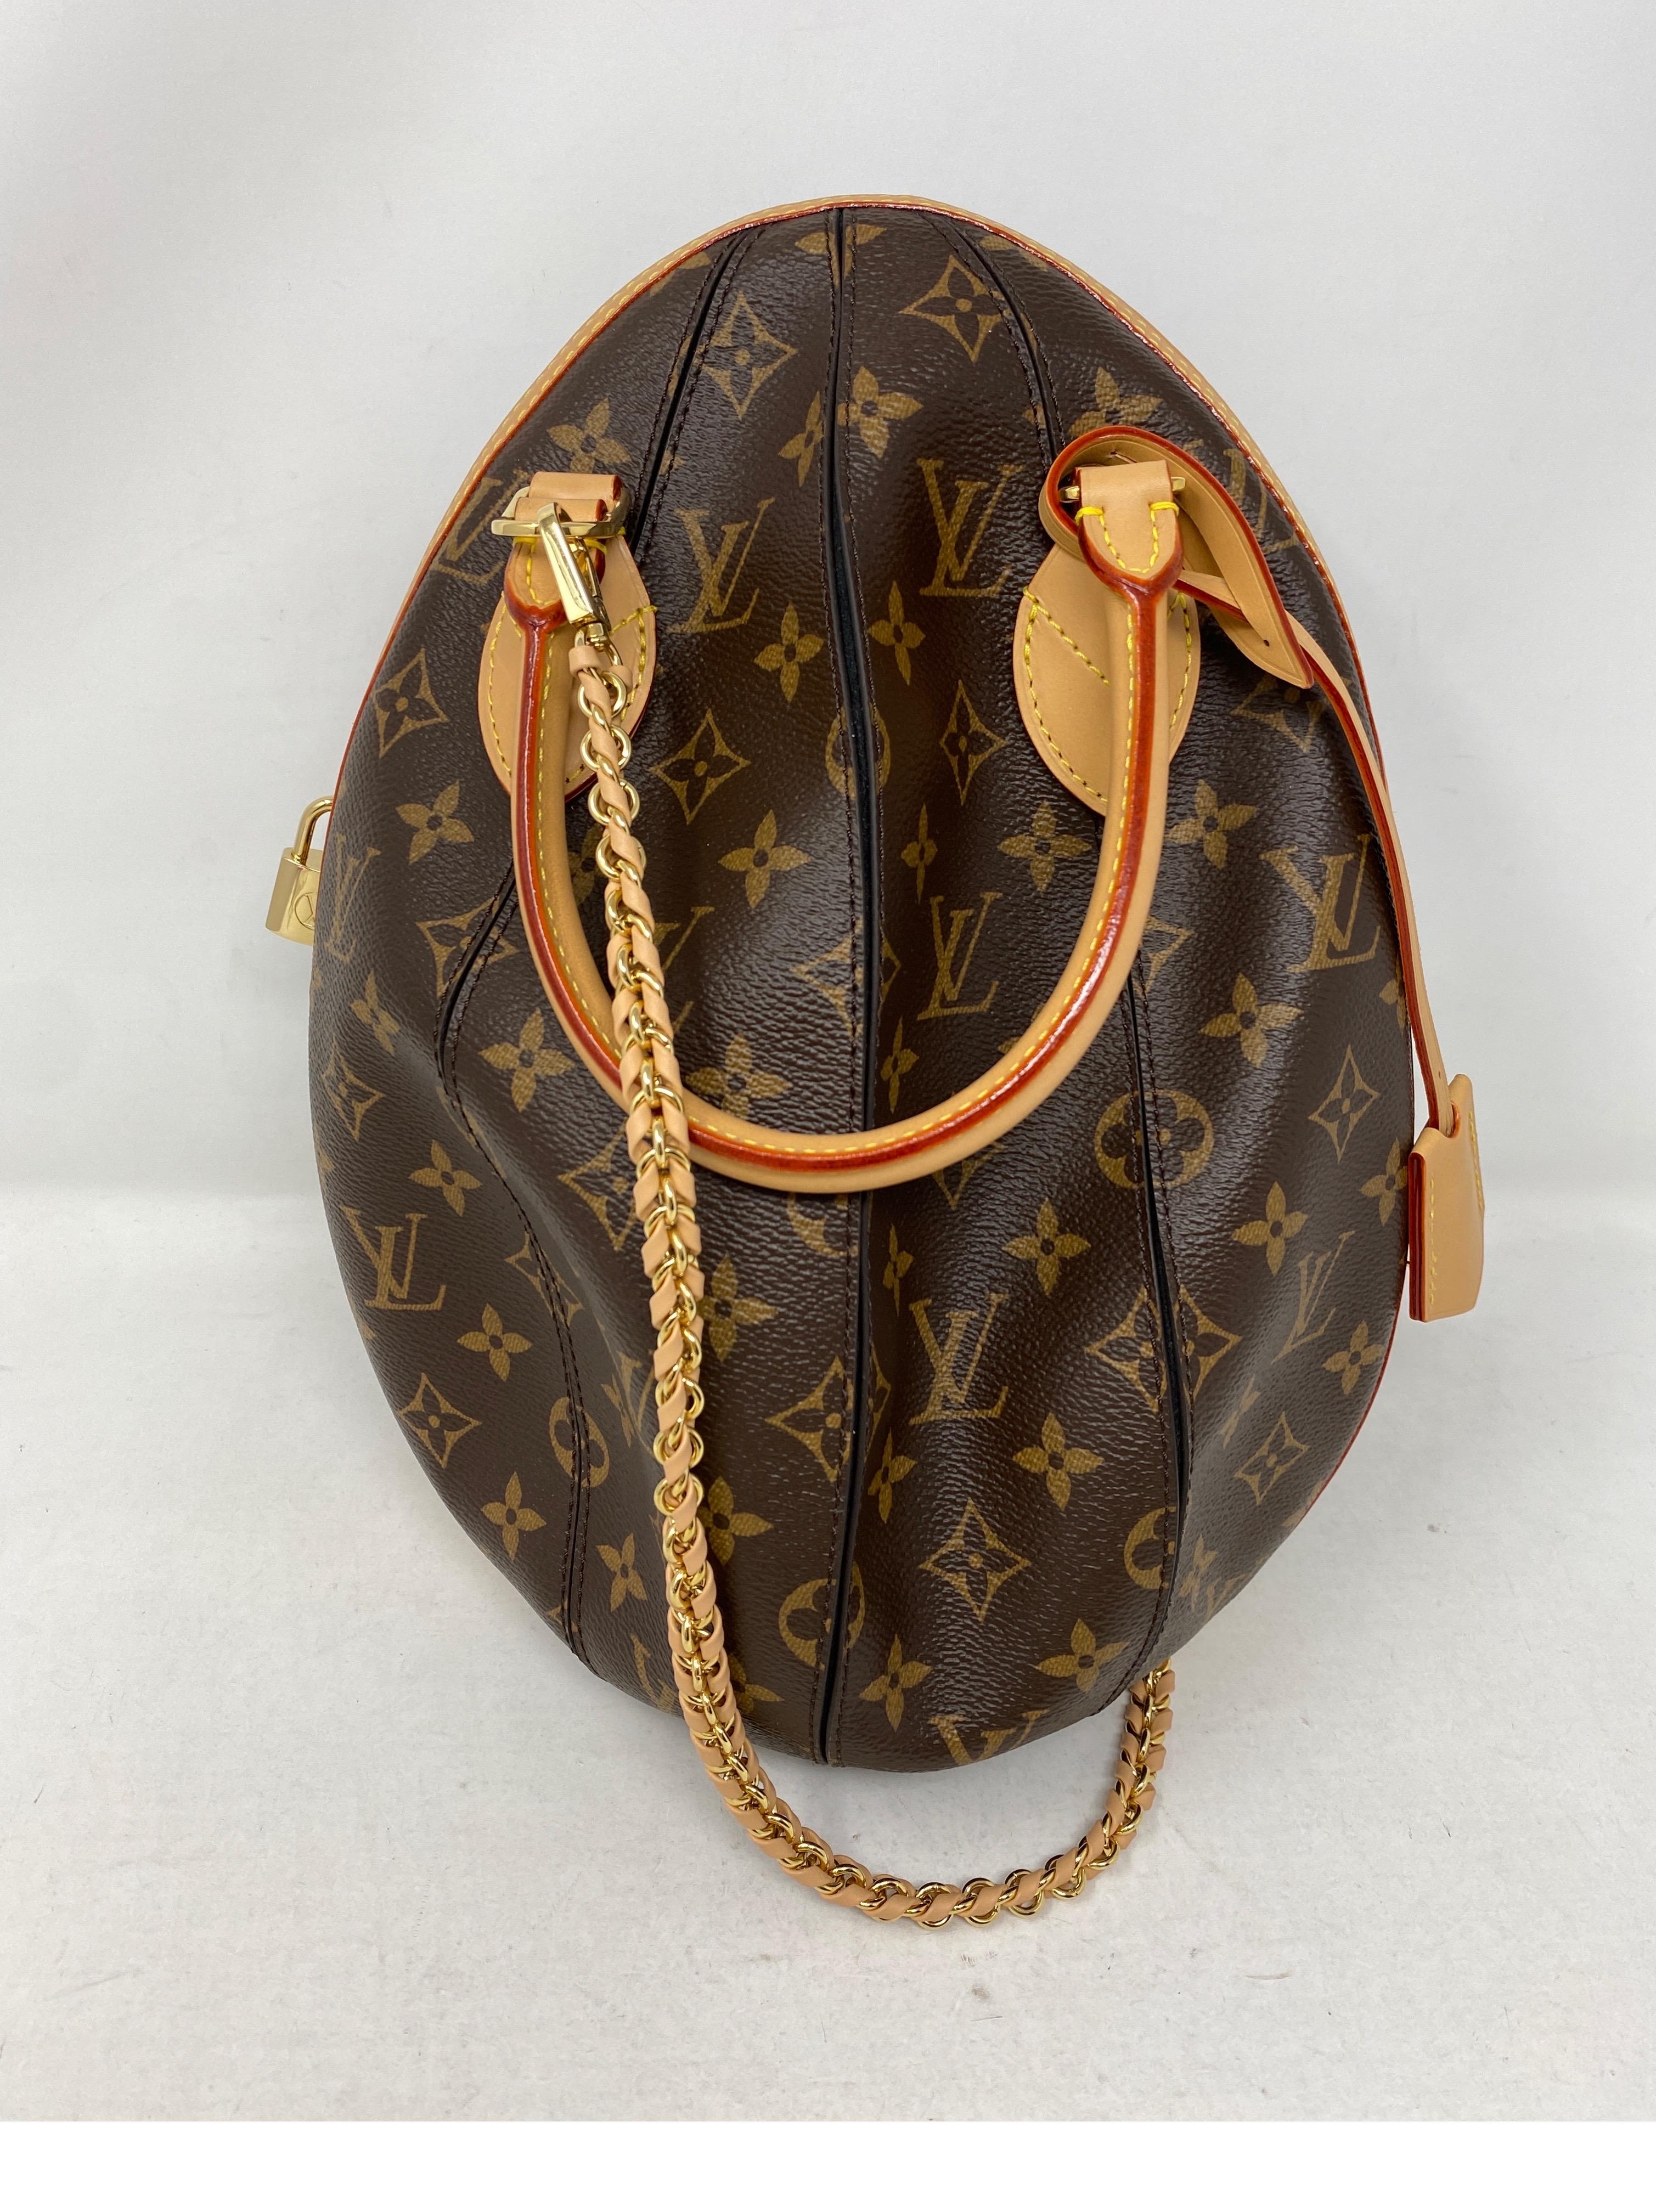 Louis Vuitton Egg Bag. Limited and rare egg shaped bag by LV. Monogram canvas and black leather. Excellent condition like new. Rare and collector's piece. Includes tag and dust cover. Guaranteed authentic. 